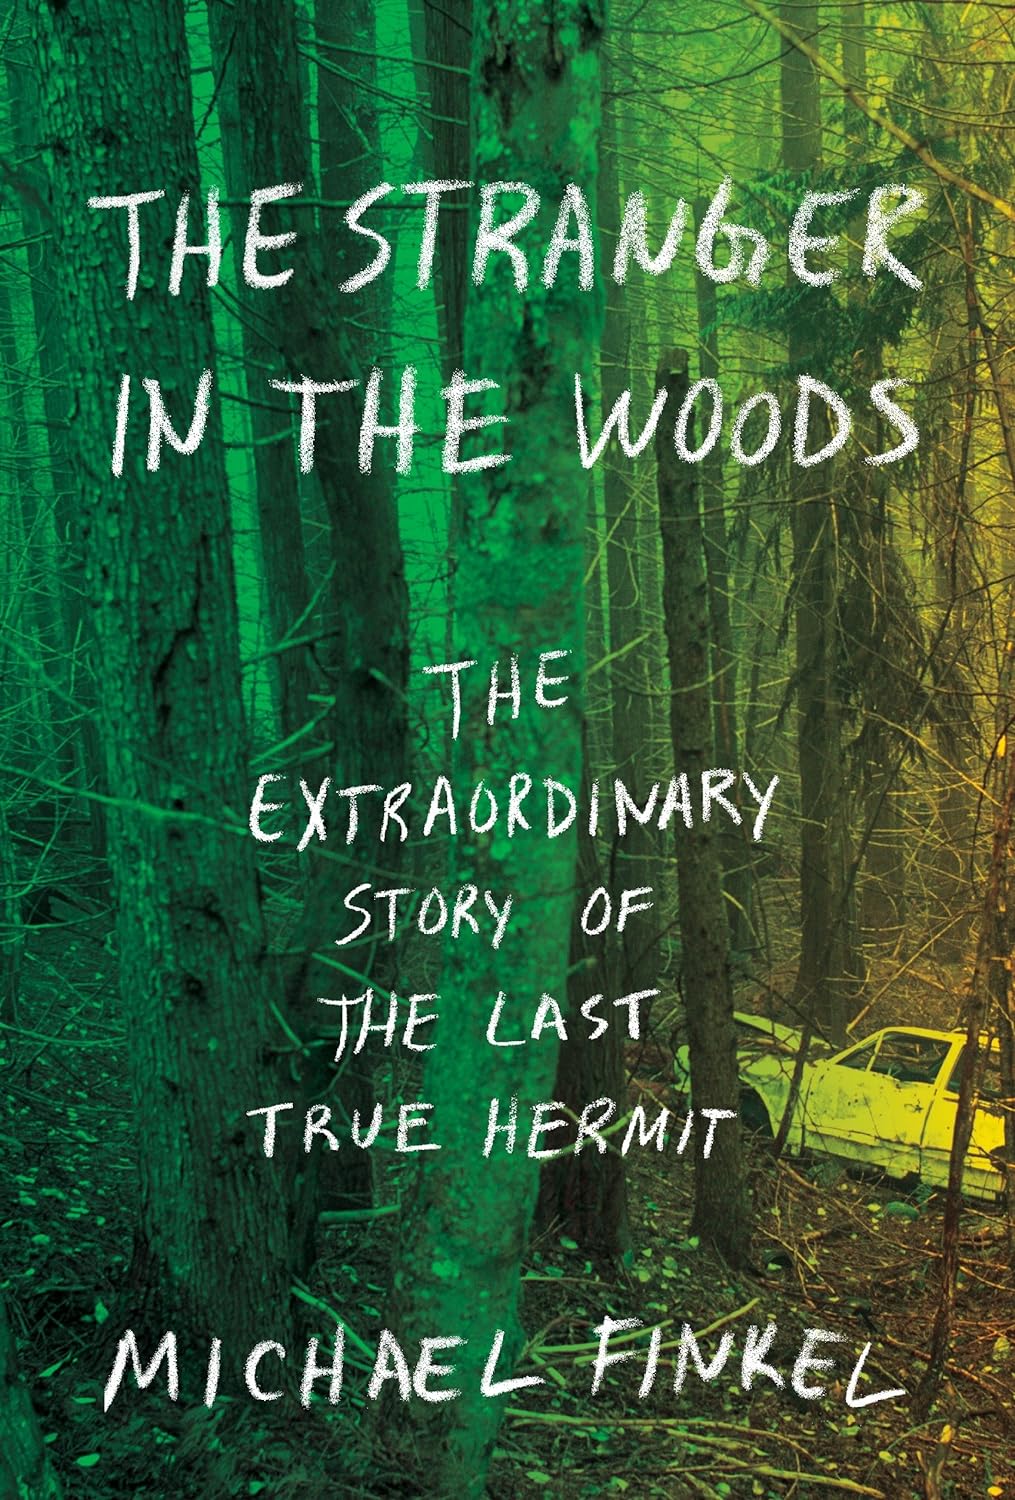 Image of the book cover featuring the woods and a damaged car in the woods as well.